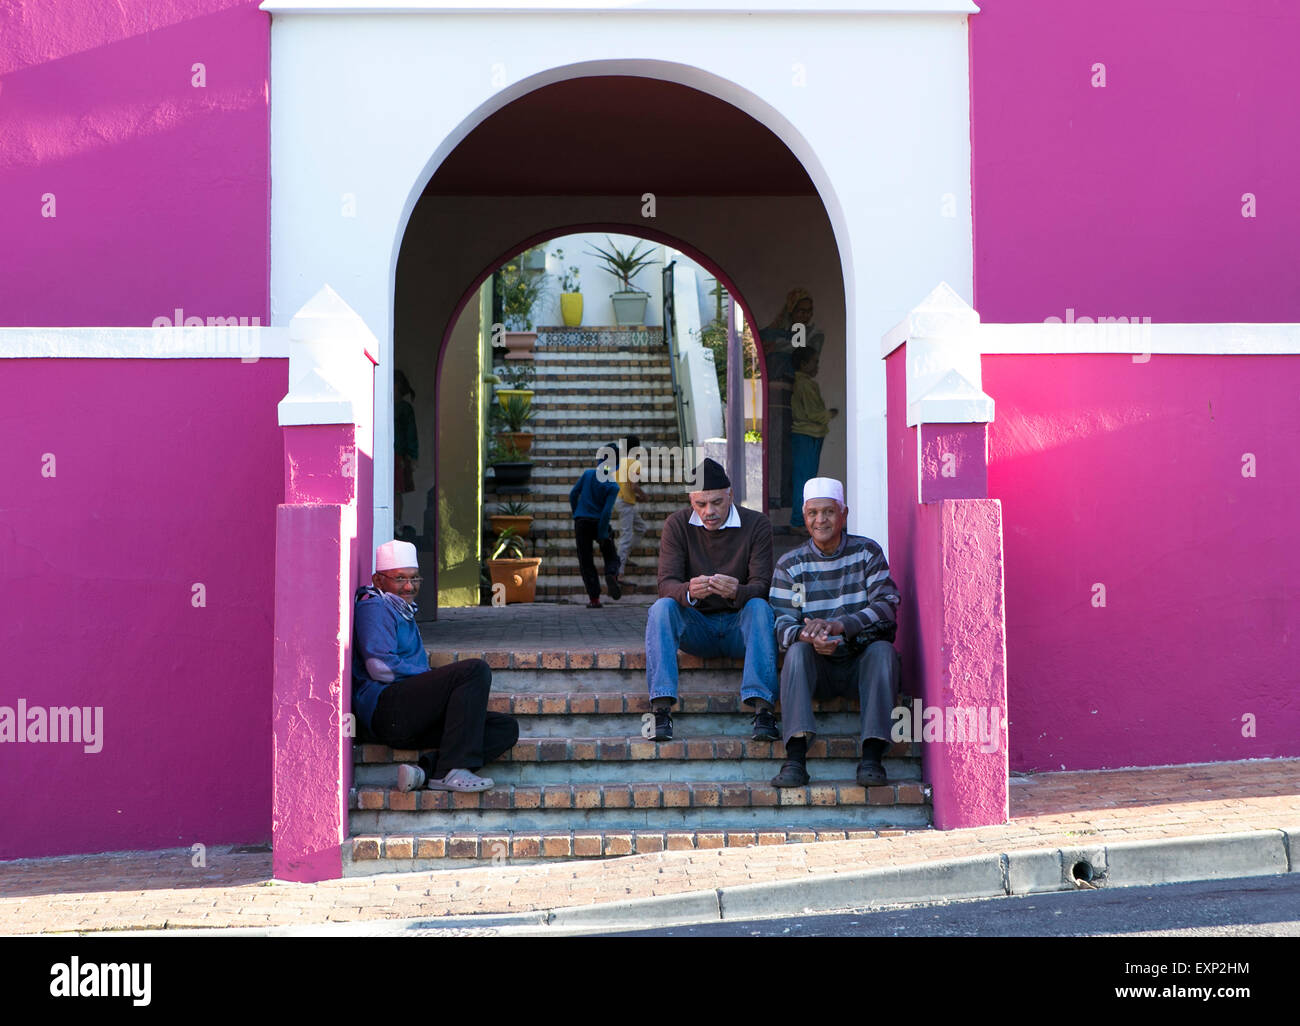 The Bo-Kaap area of Cape Town, South Africa formerly known as the Malay Quarter. Stock Photo